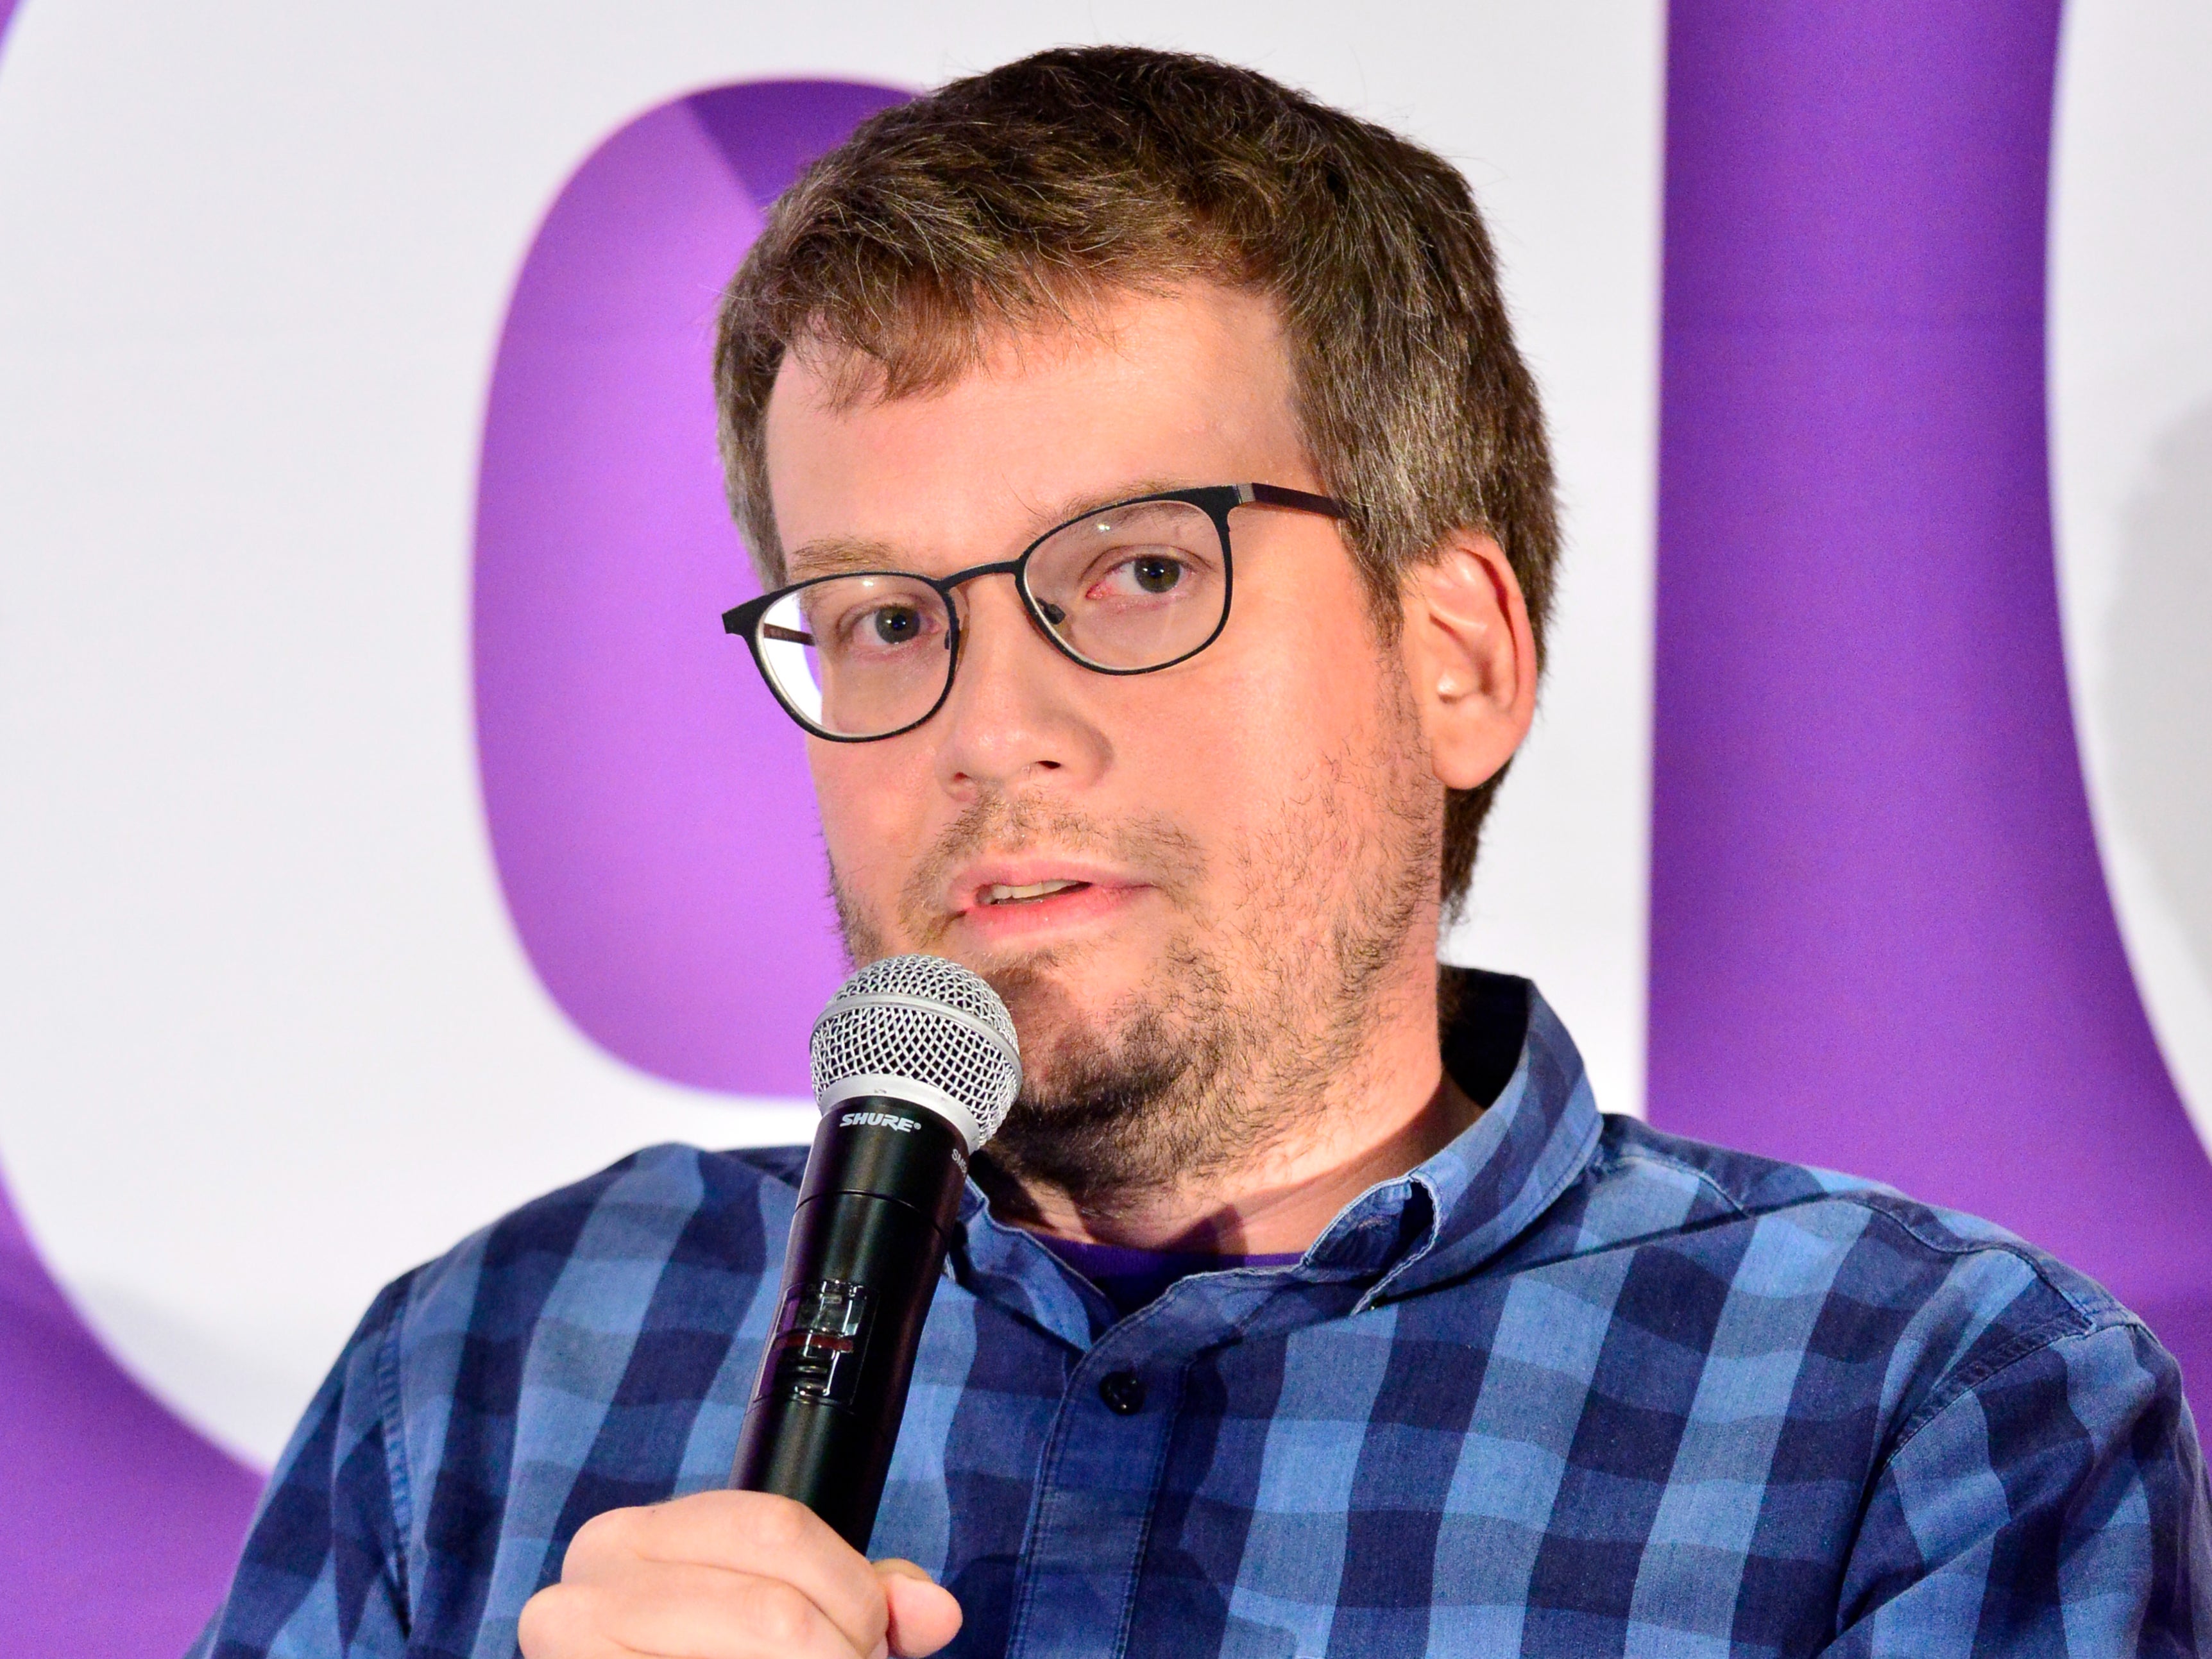 John Green attends VidCon 2019 at Anaheim Convention Center on 13 July 2019 in Anaheim, California